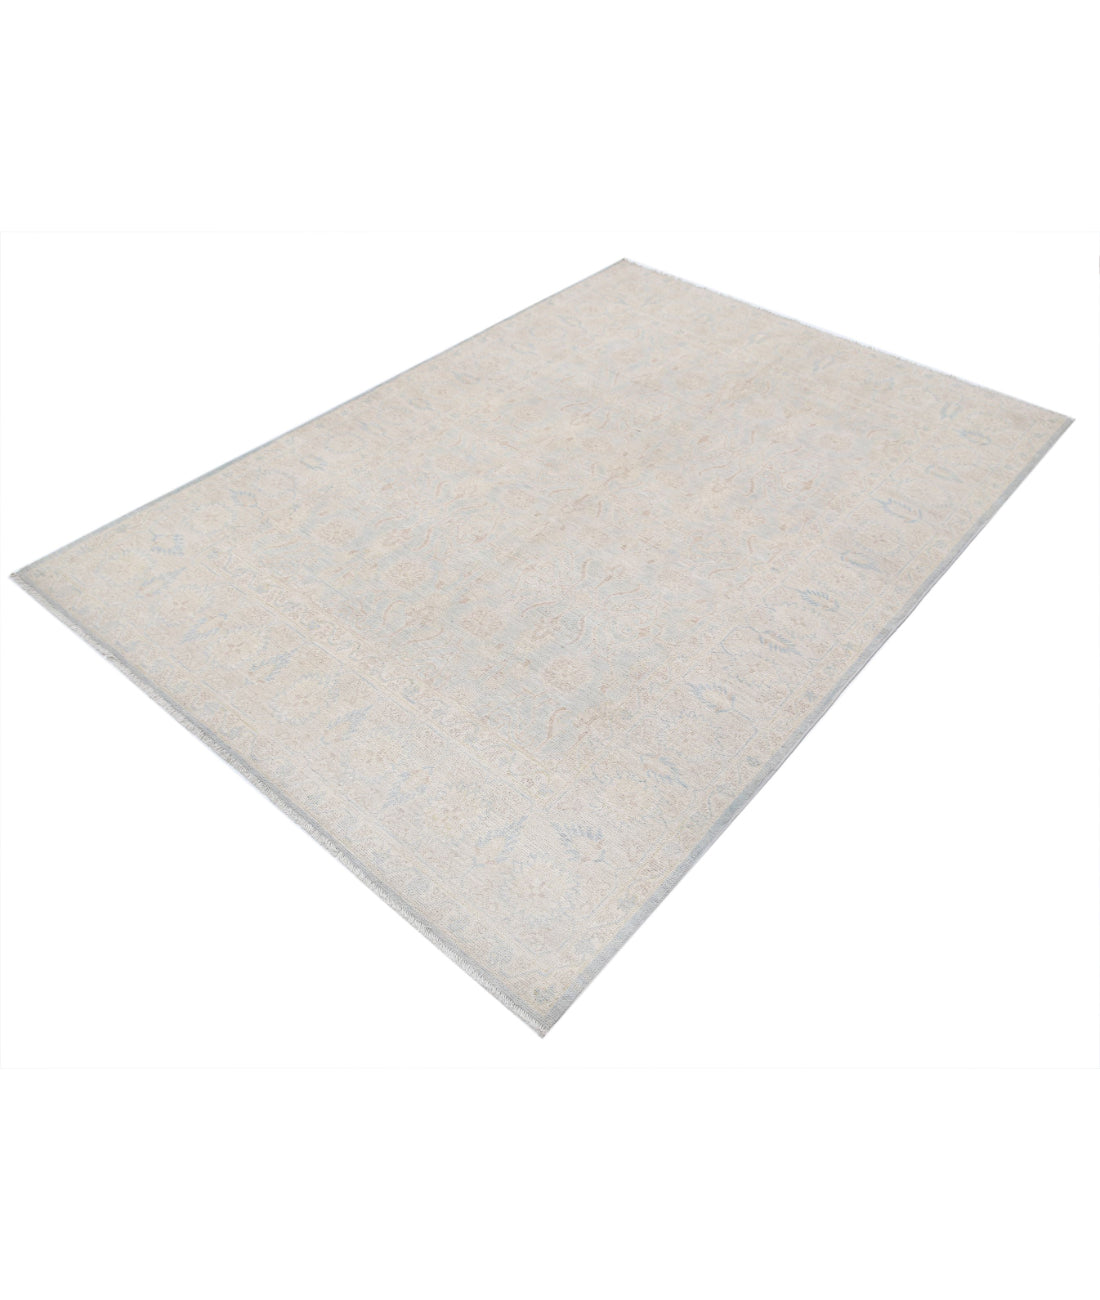 Serenity 4'10'' X 6'10'' Hand-Knotted Wool Rug 4'10'' x 6'10'' (145 X 205) / Ivory / Blue